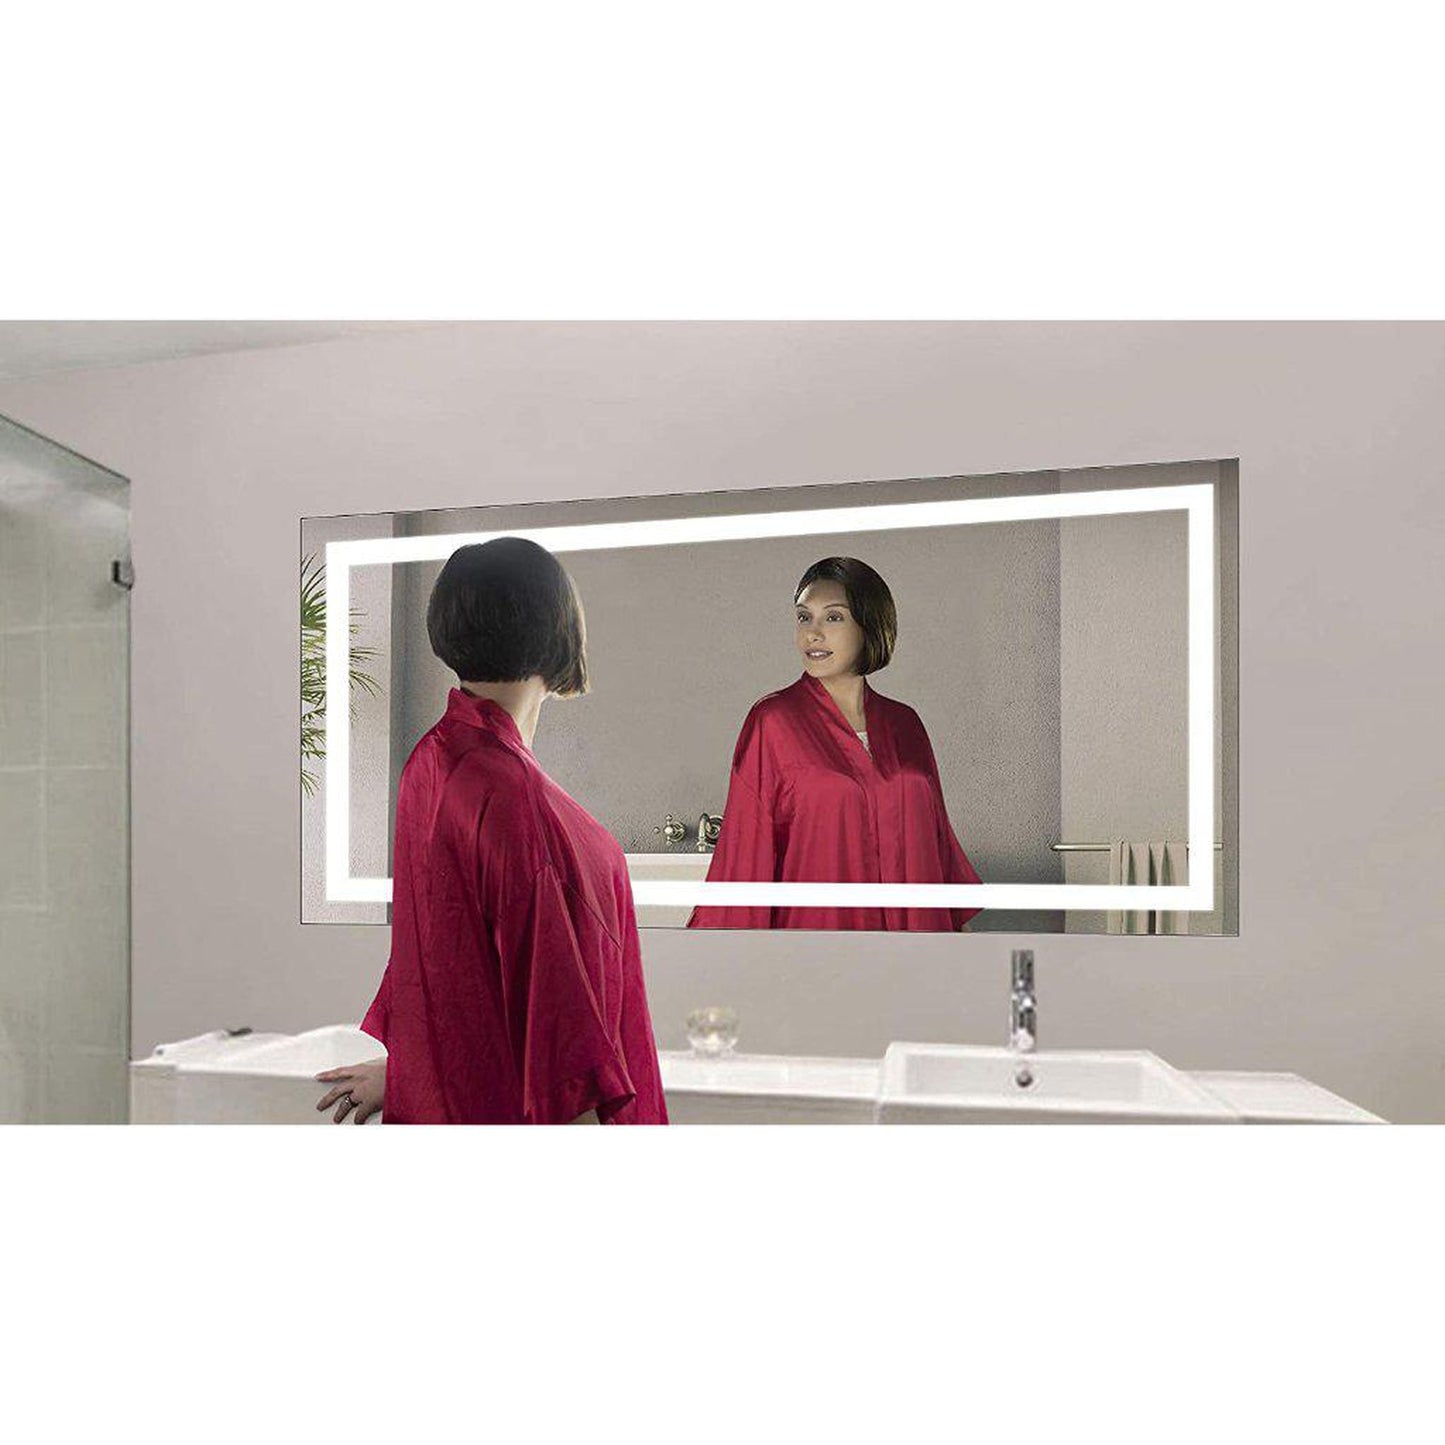 Krugg Reflections Icon 60" x 30" 5000K Rectangular Wall-Mounted Illuminated Silver Backed LED Mirror With Built-in Defogger and Touch Sensor On/Off Built-in Dimmer